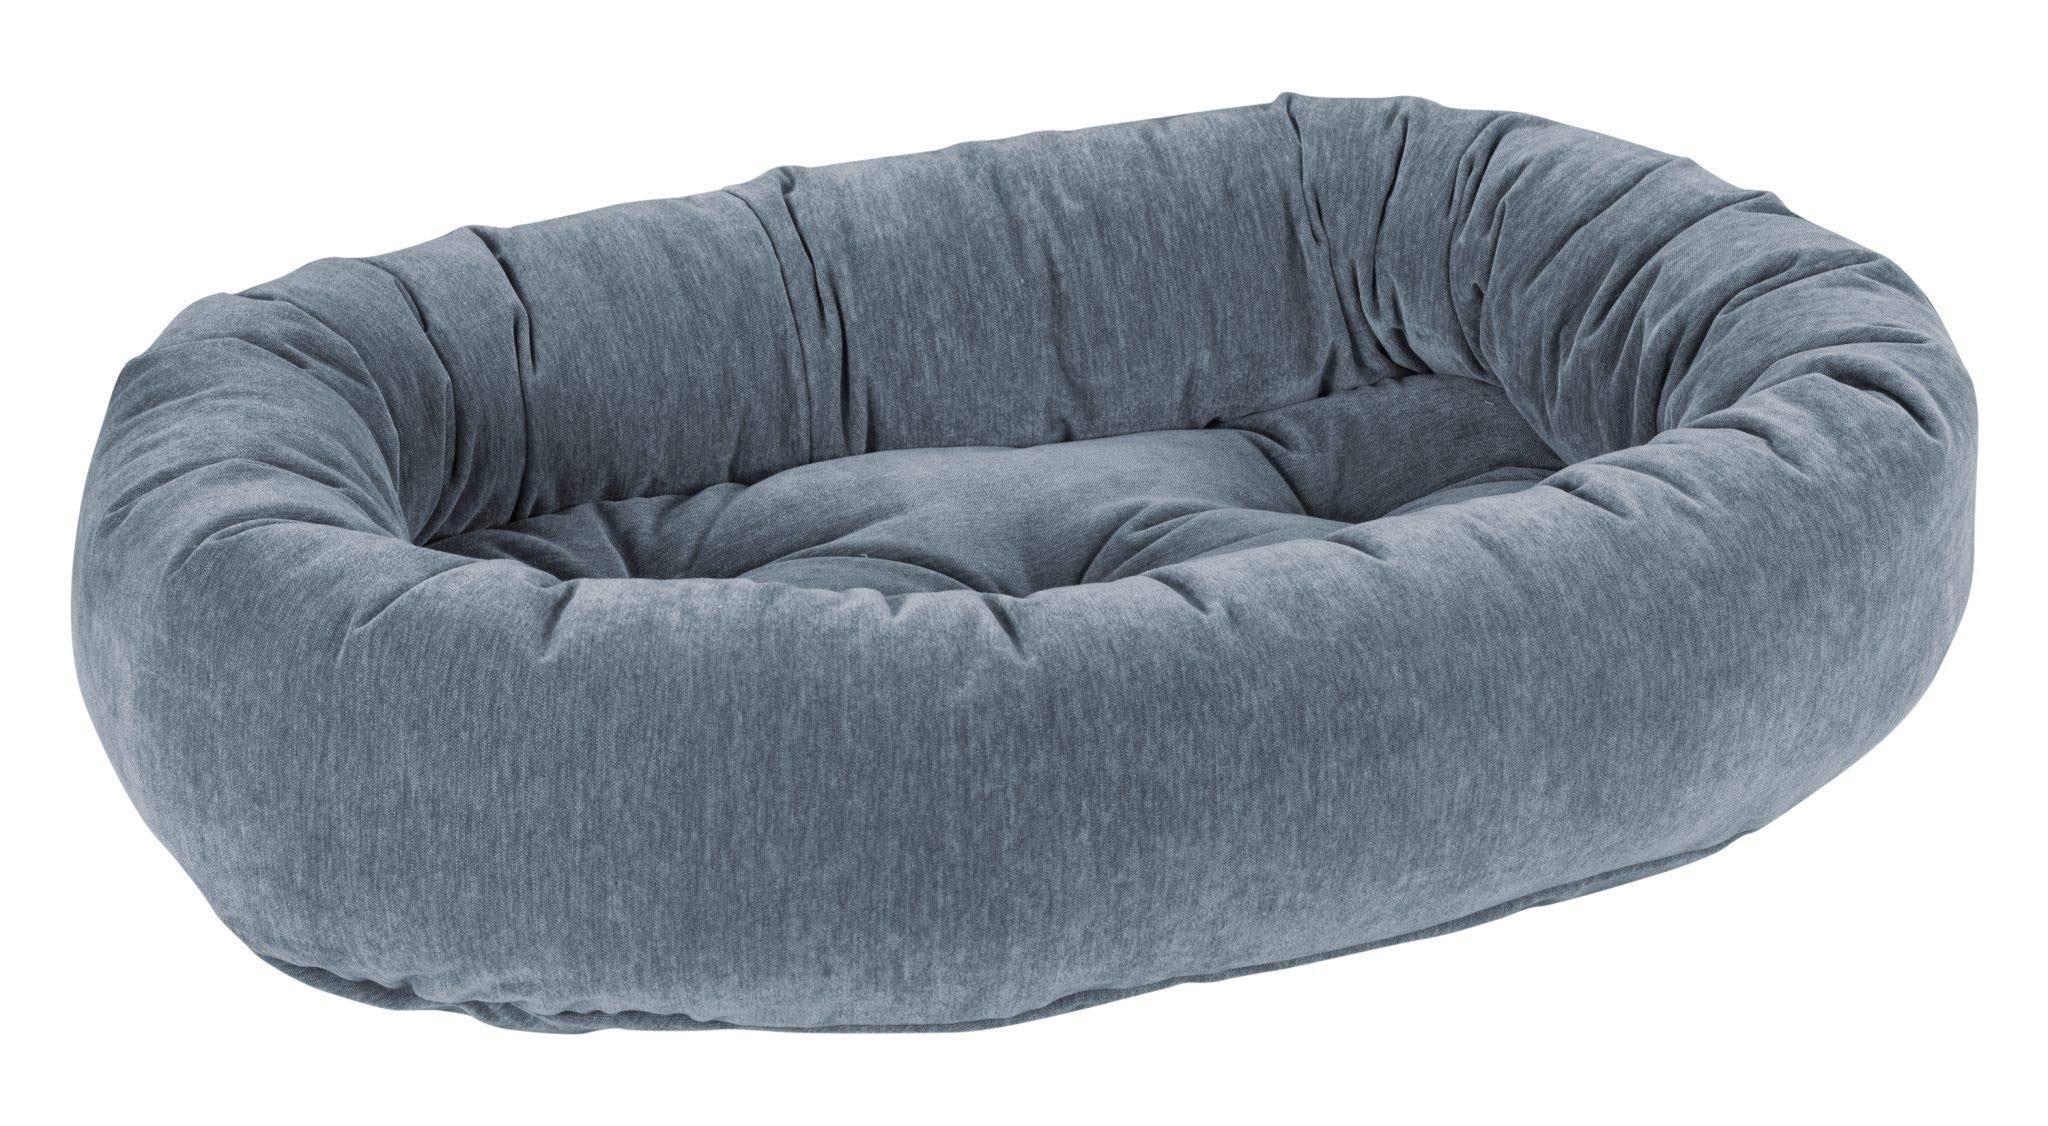 Bowsers Mineral Chenille Donut Dog Bed Xs BLUE.